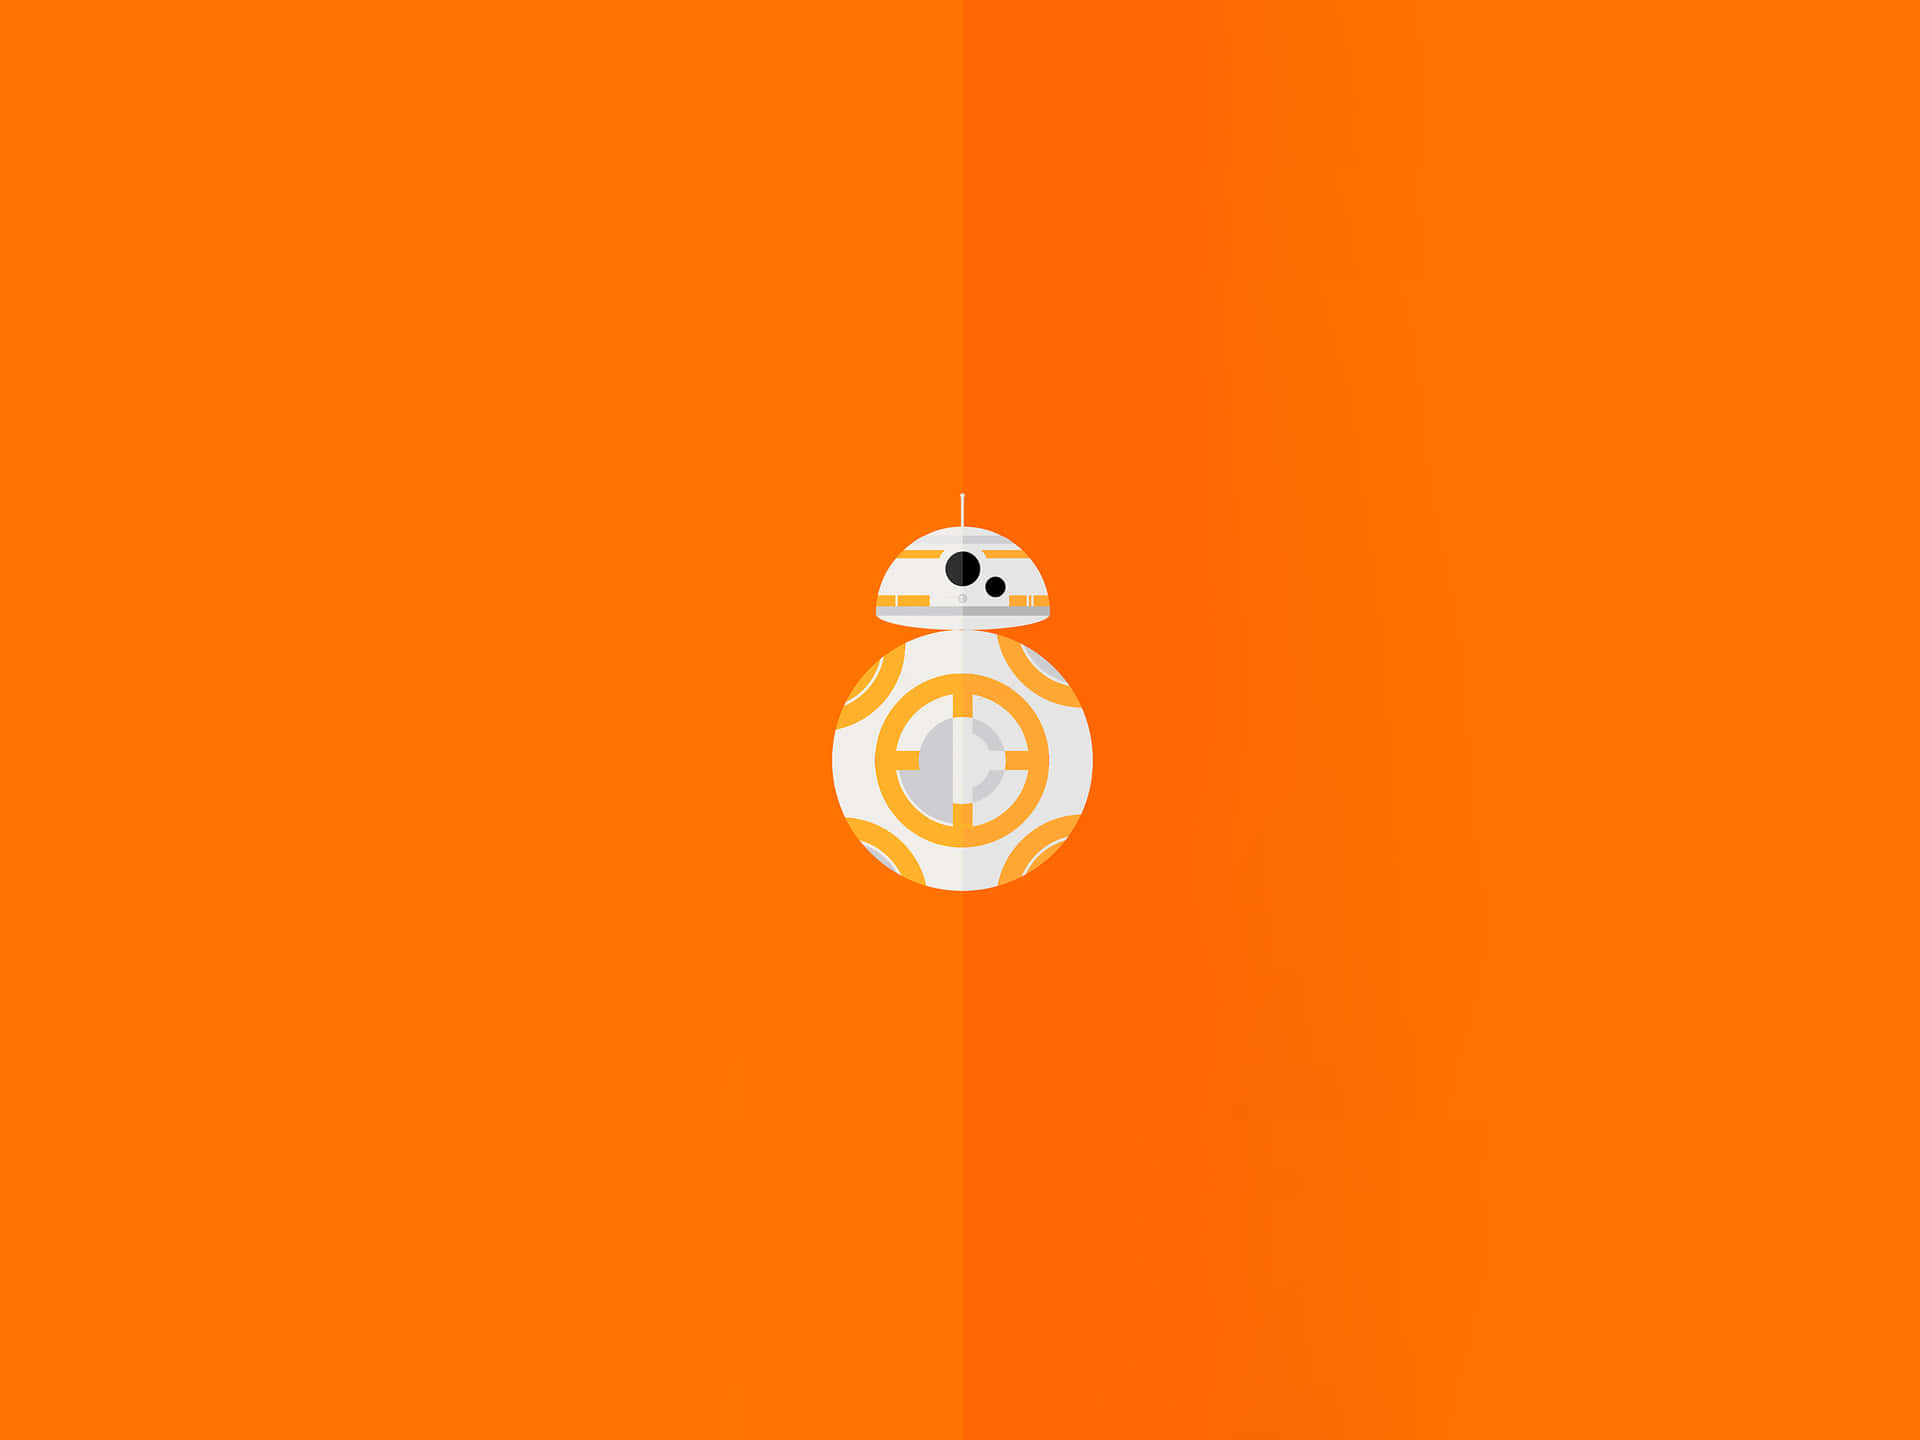 BB 8, the adorable, happy-go-lucky astromech droid from the Star Wars universe Wallpaper